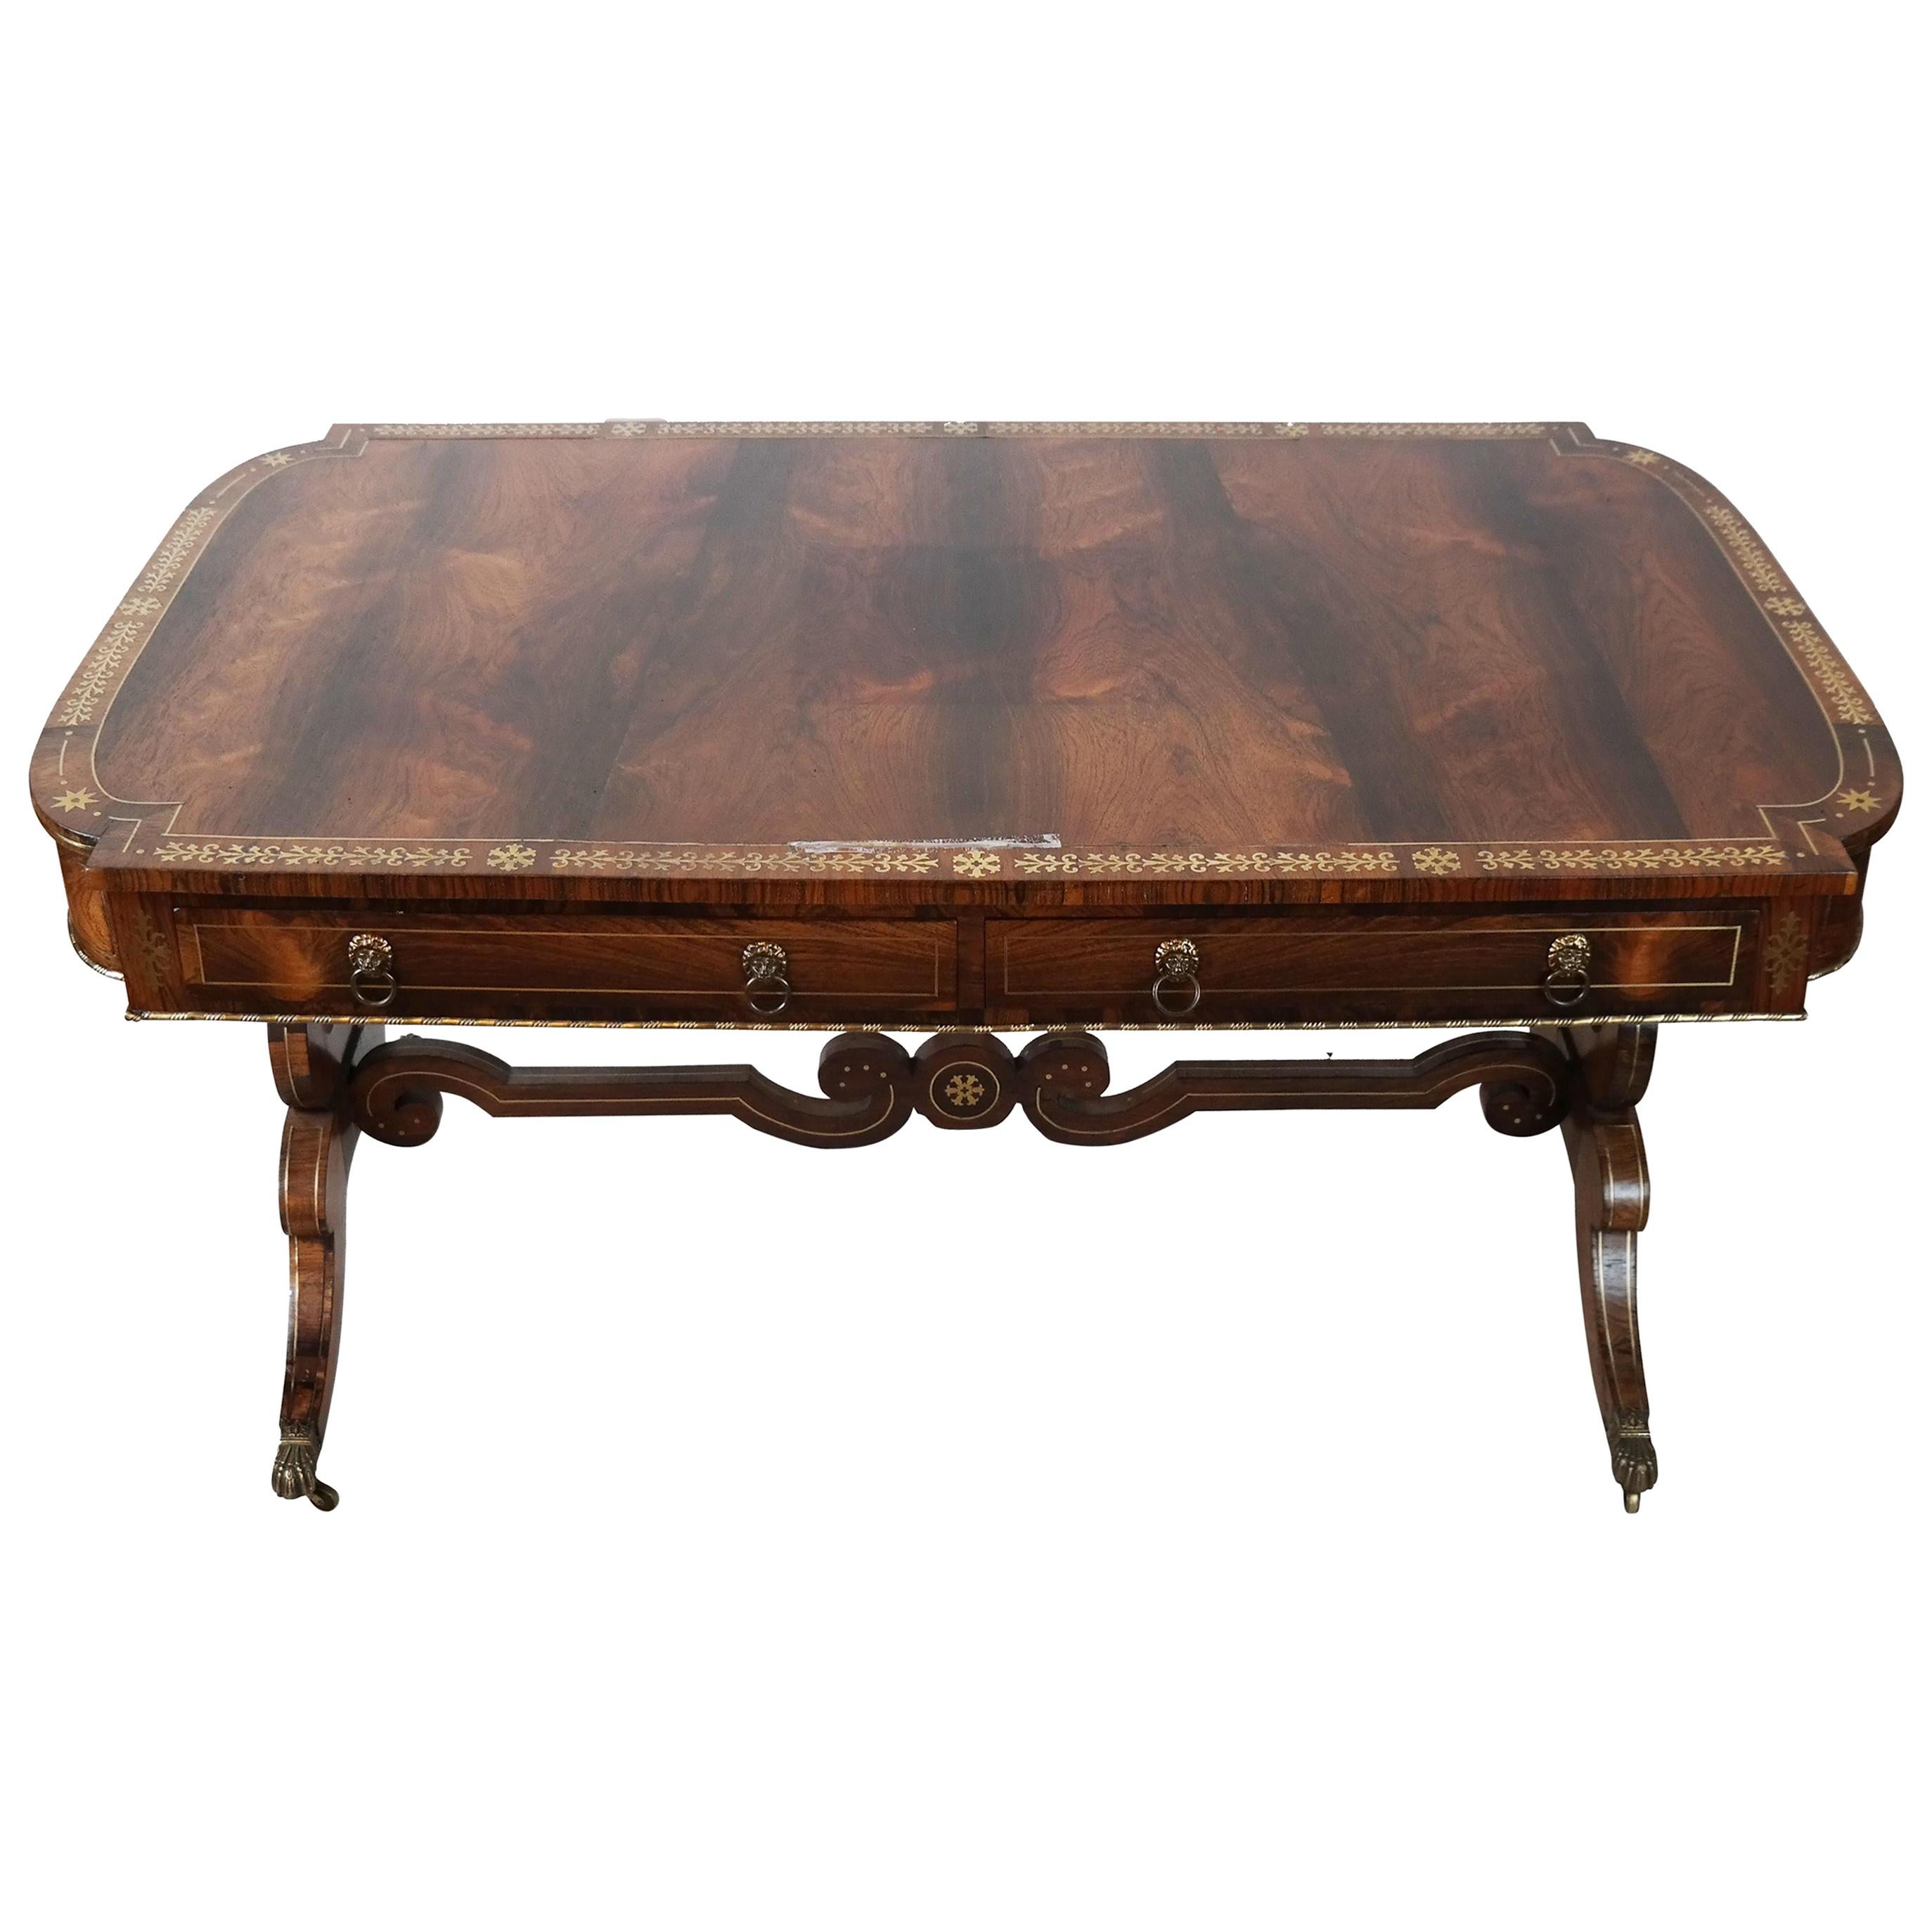 19th Century Fine English Regency Rosewood and Brass Inlayed Desk